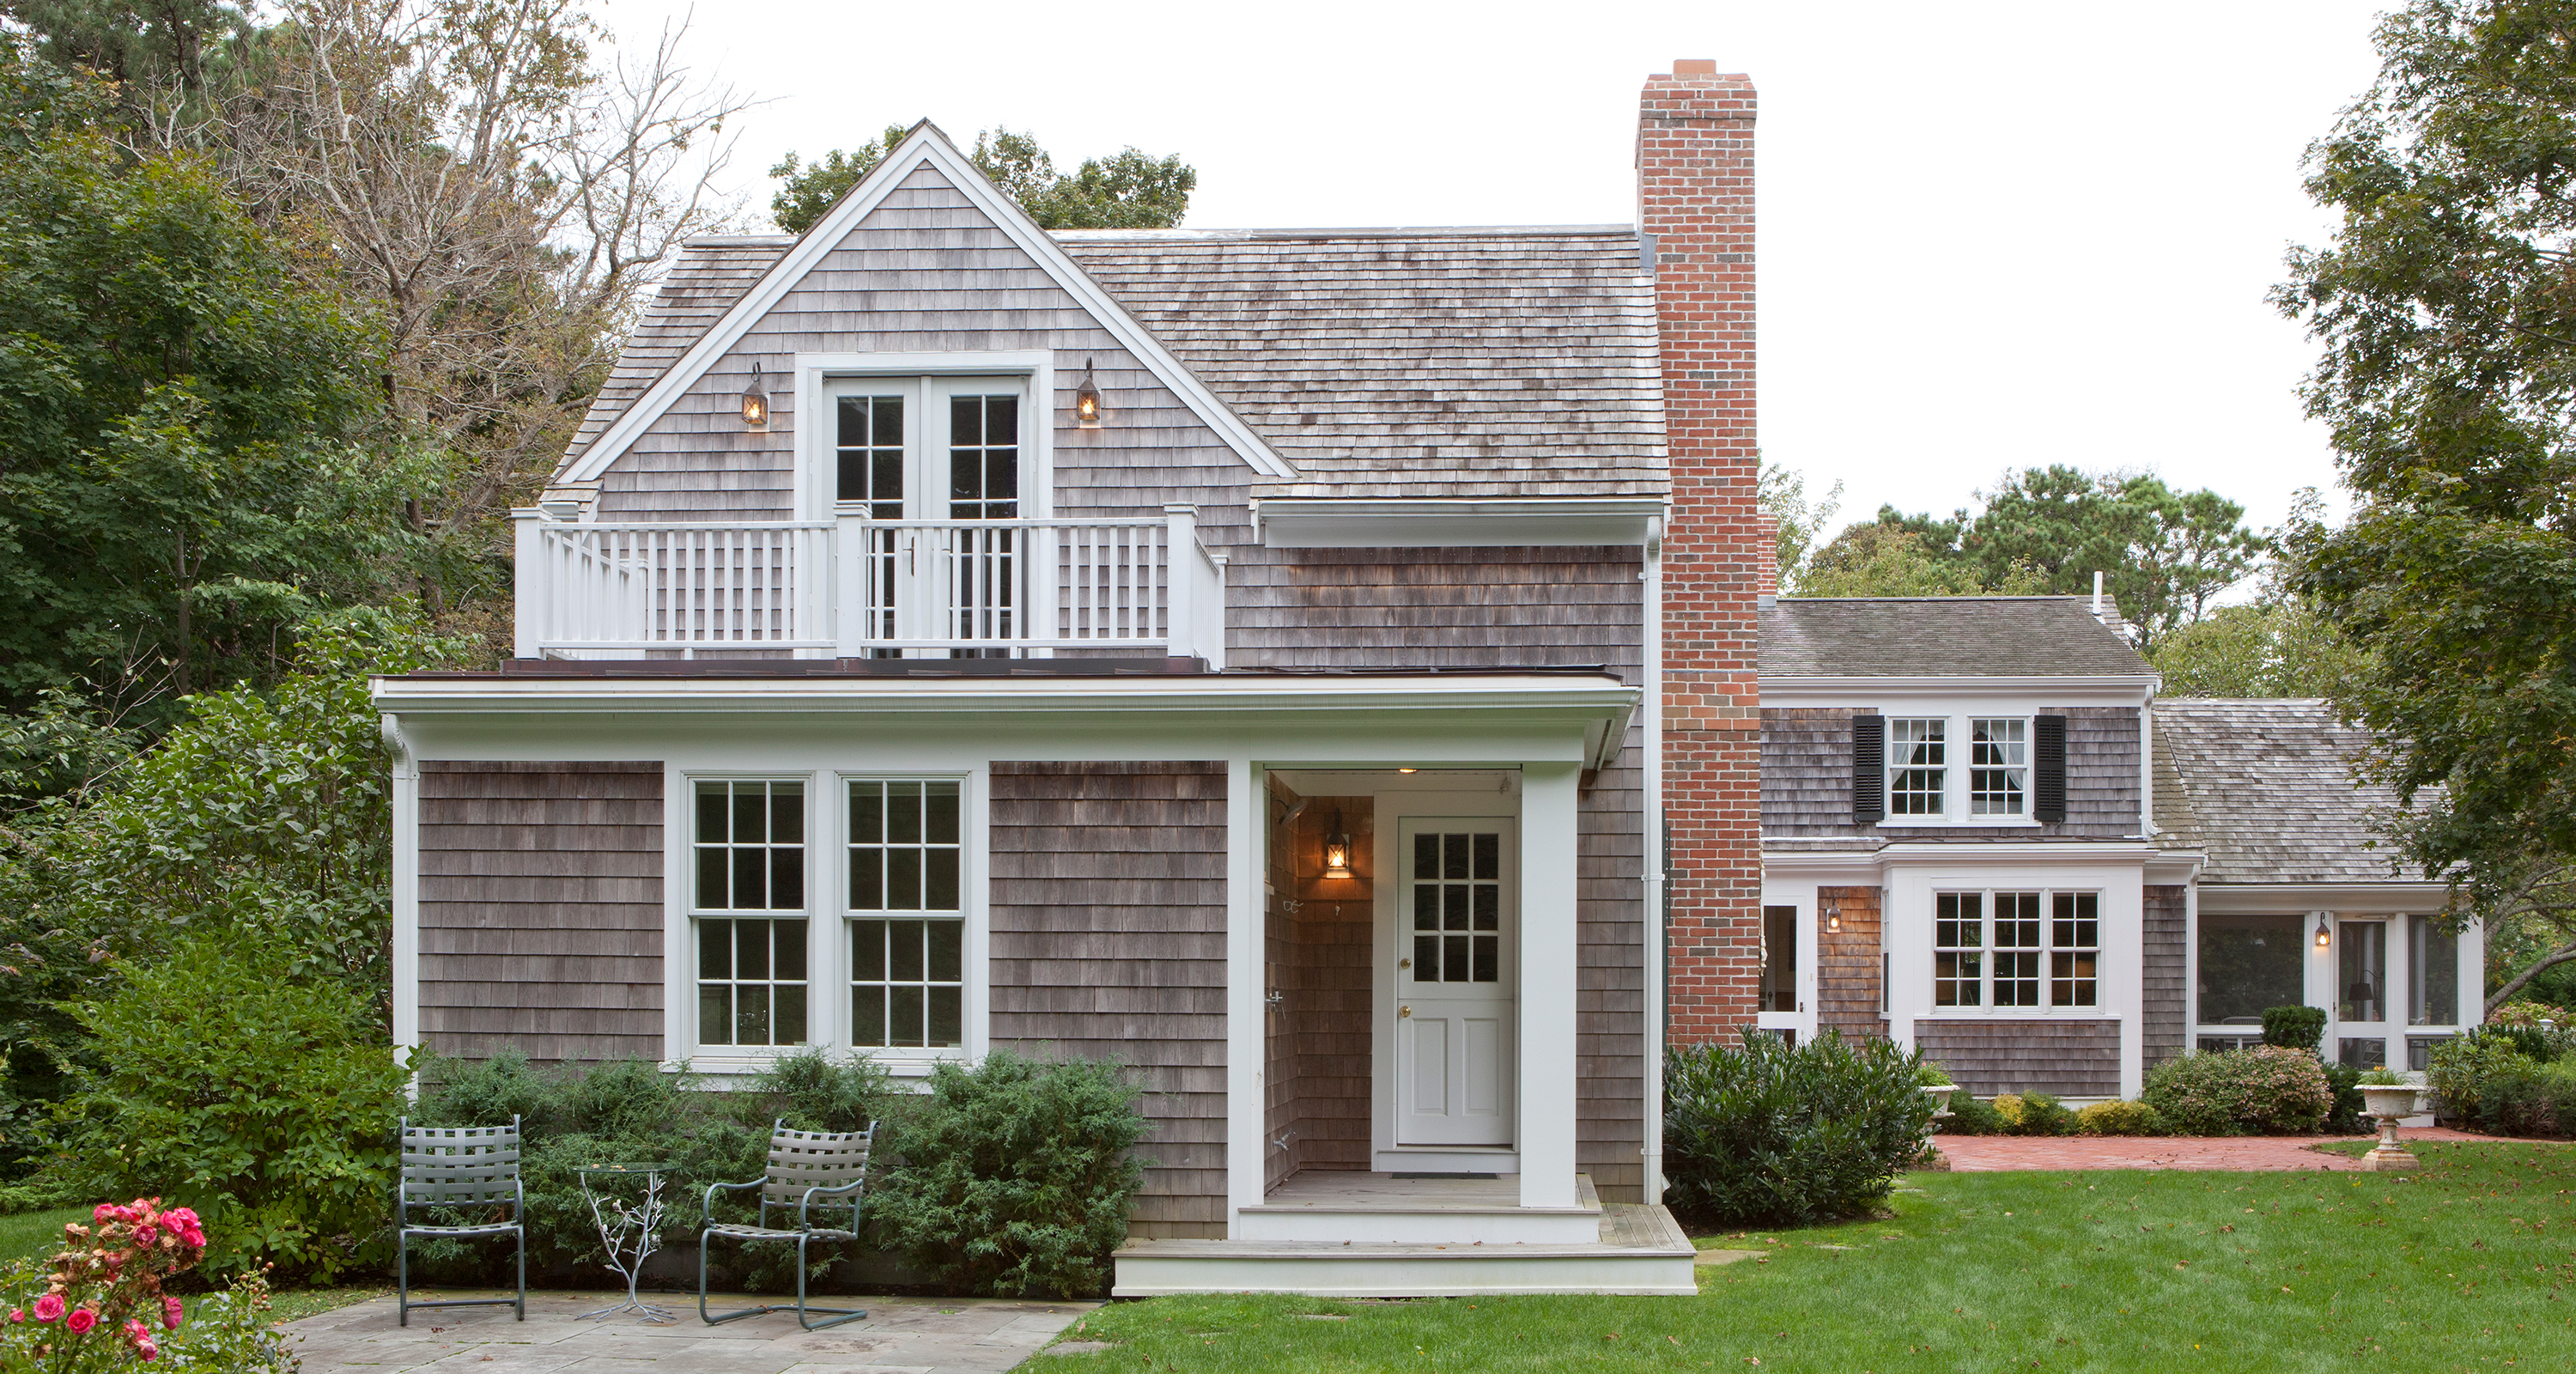 Cape Cod House Style The Ultimate Guide To What It Is And How To Get The Look Homes Gardens